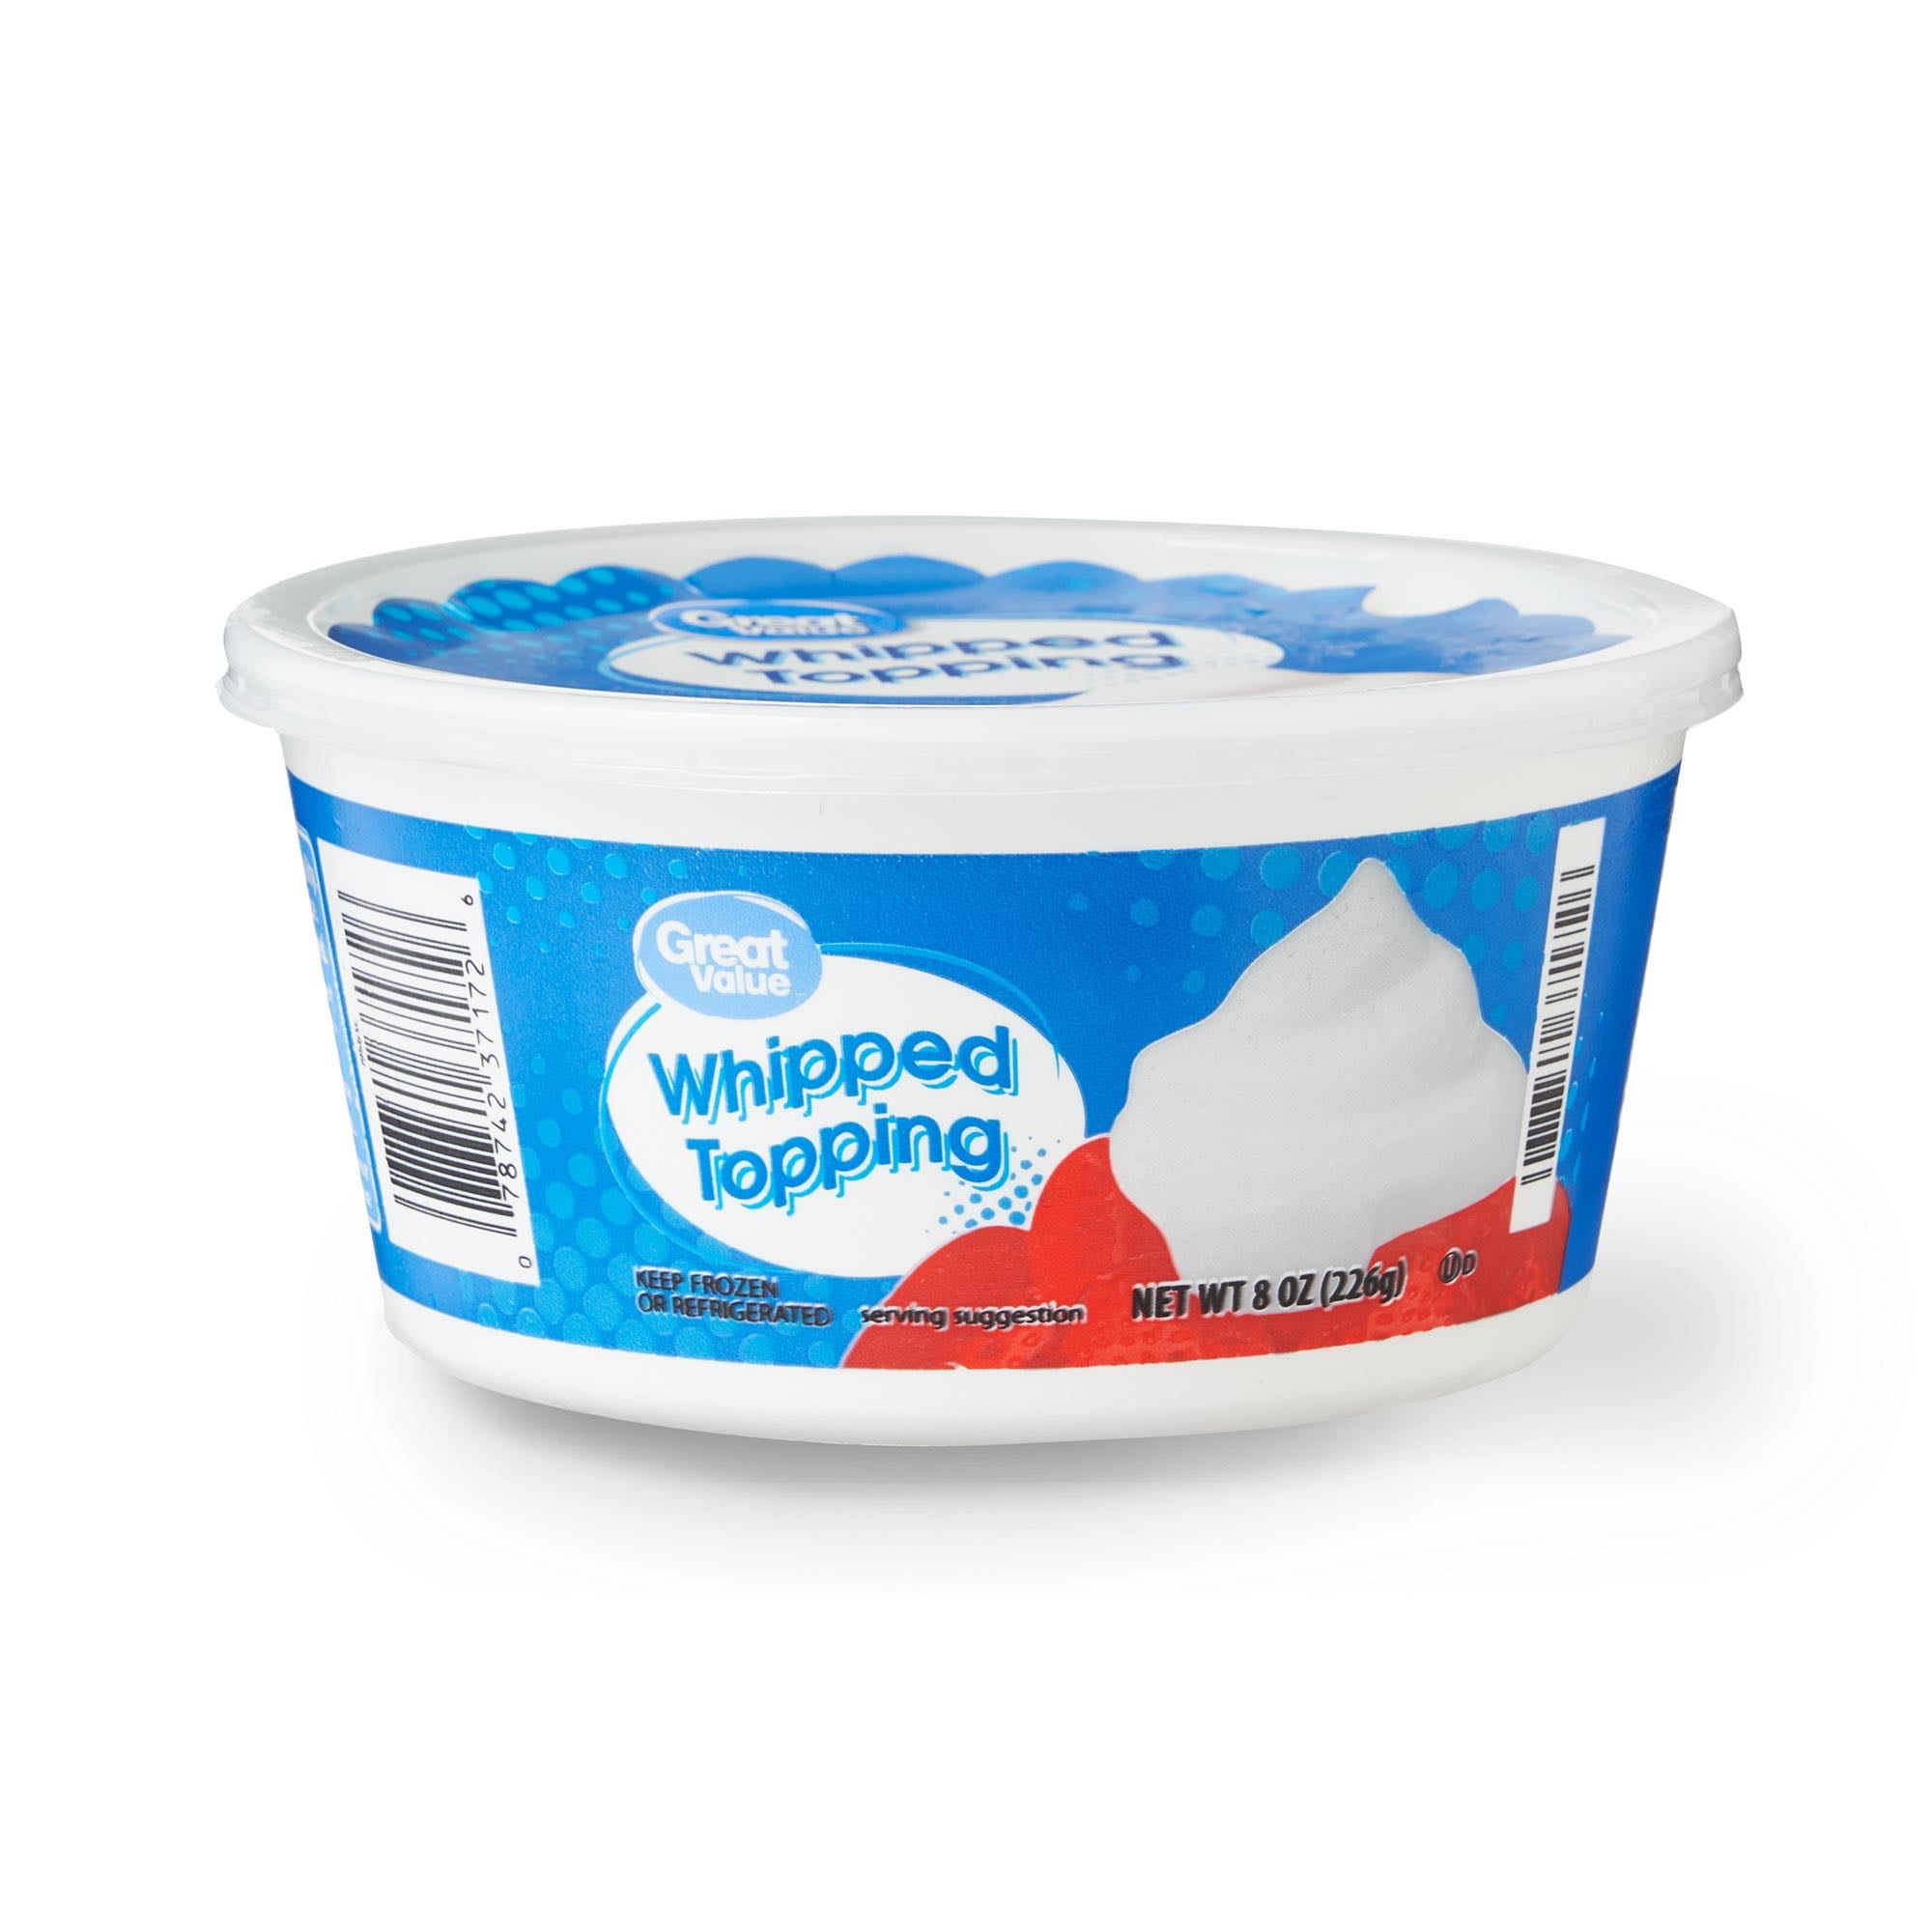 Great Value Whipped Topping, 8 oz, Frozen Dessert Topping